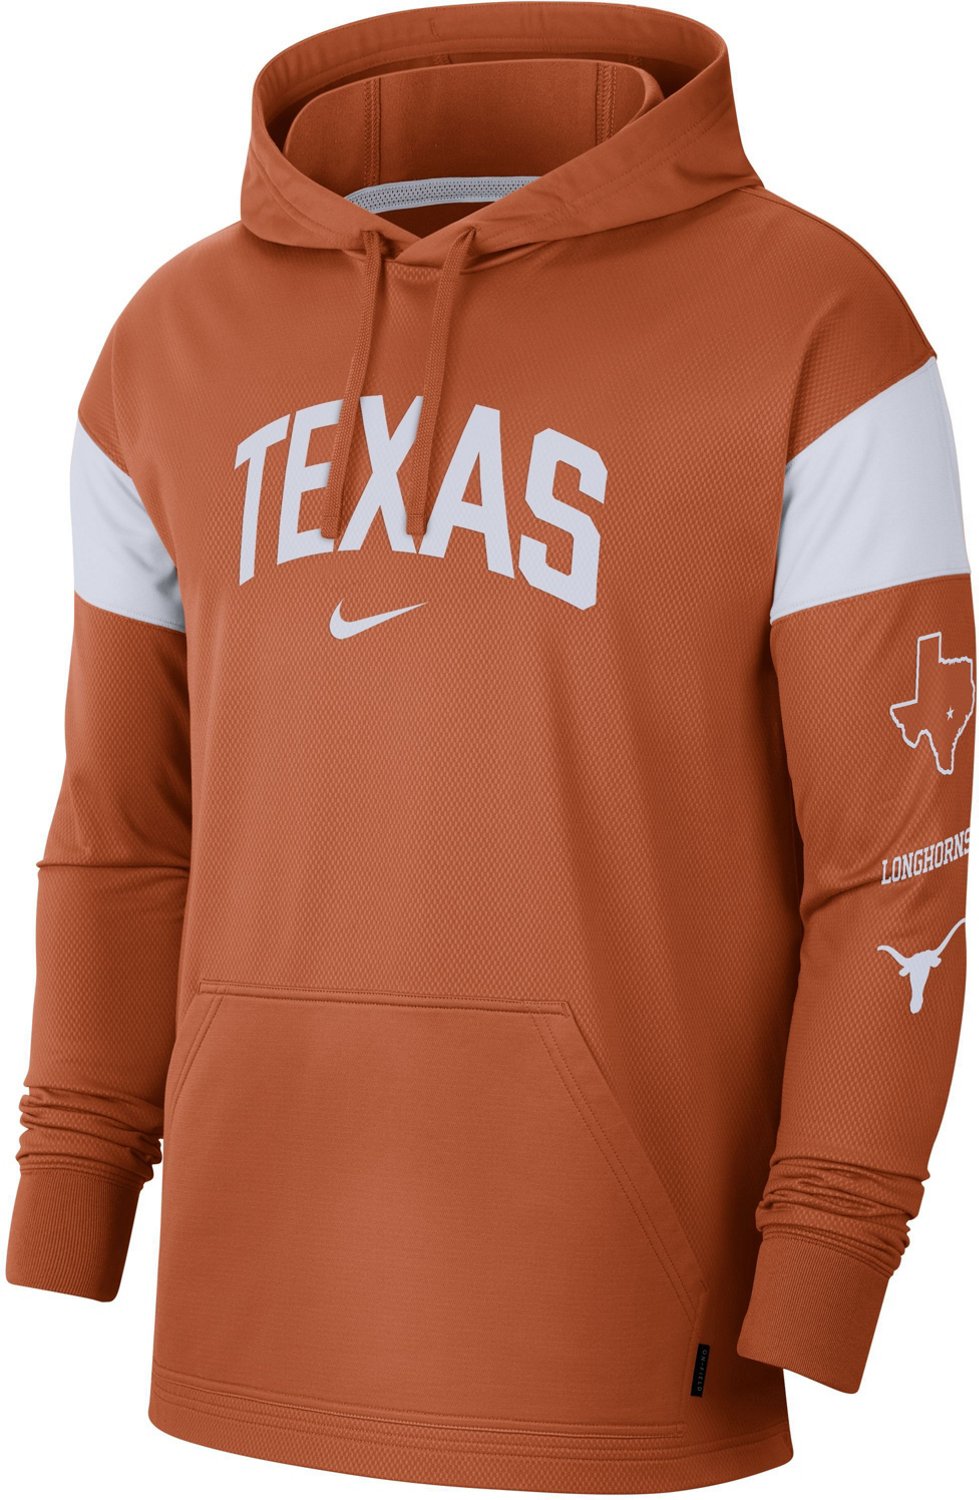 Nike Men's University of Texas Dri-FIT Jersey Pullover Hoodie | Academy